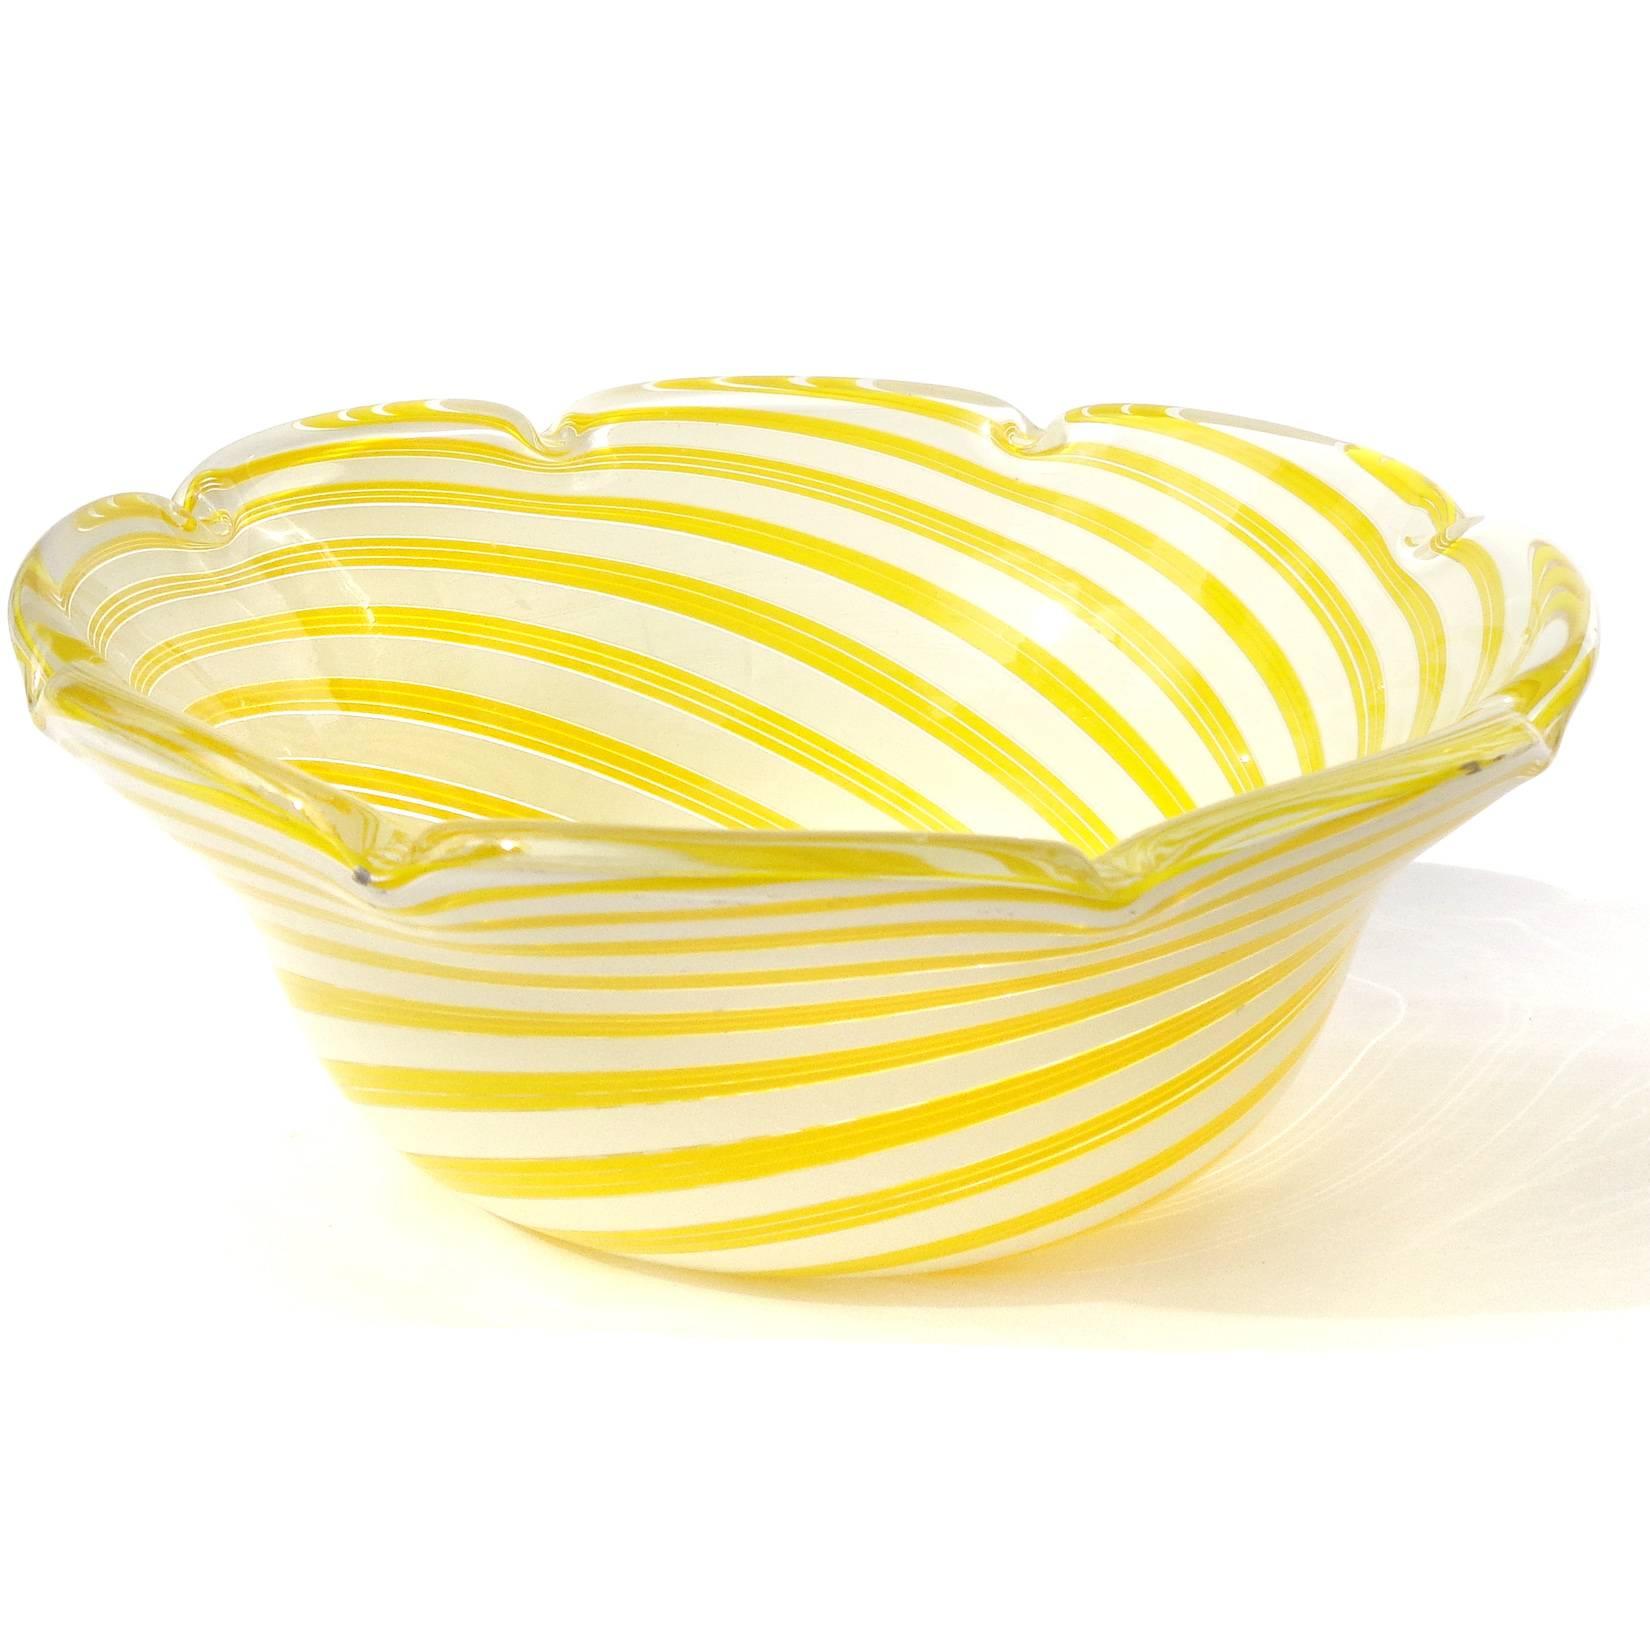 Free shipping worldwide! See details below description.

Beautiful large Murano handblown filigrana yellow and white ribbons art glass center bowl. Documented to designer Dino Martens for Aureliano Toso. The piece has a scalloped rim and would